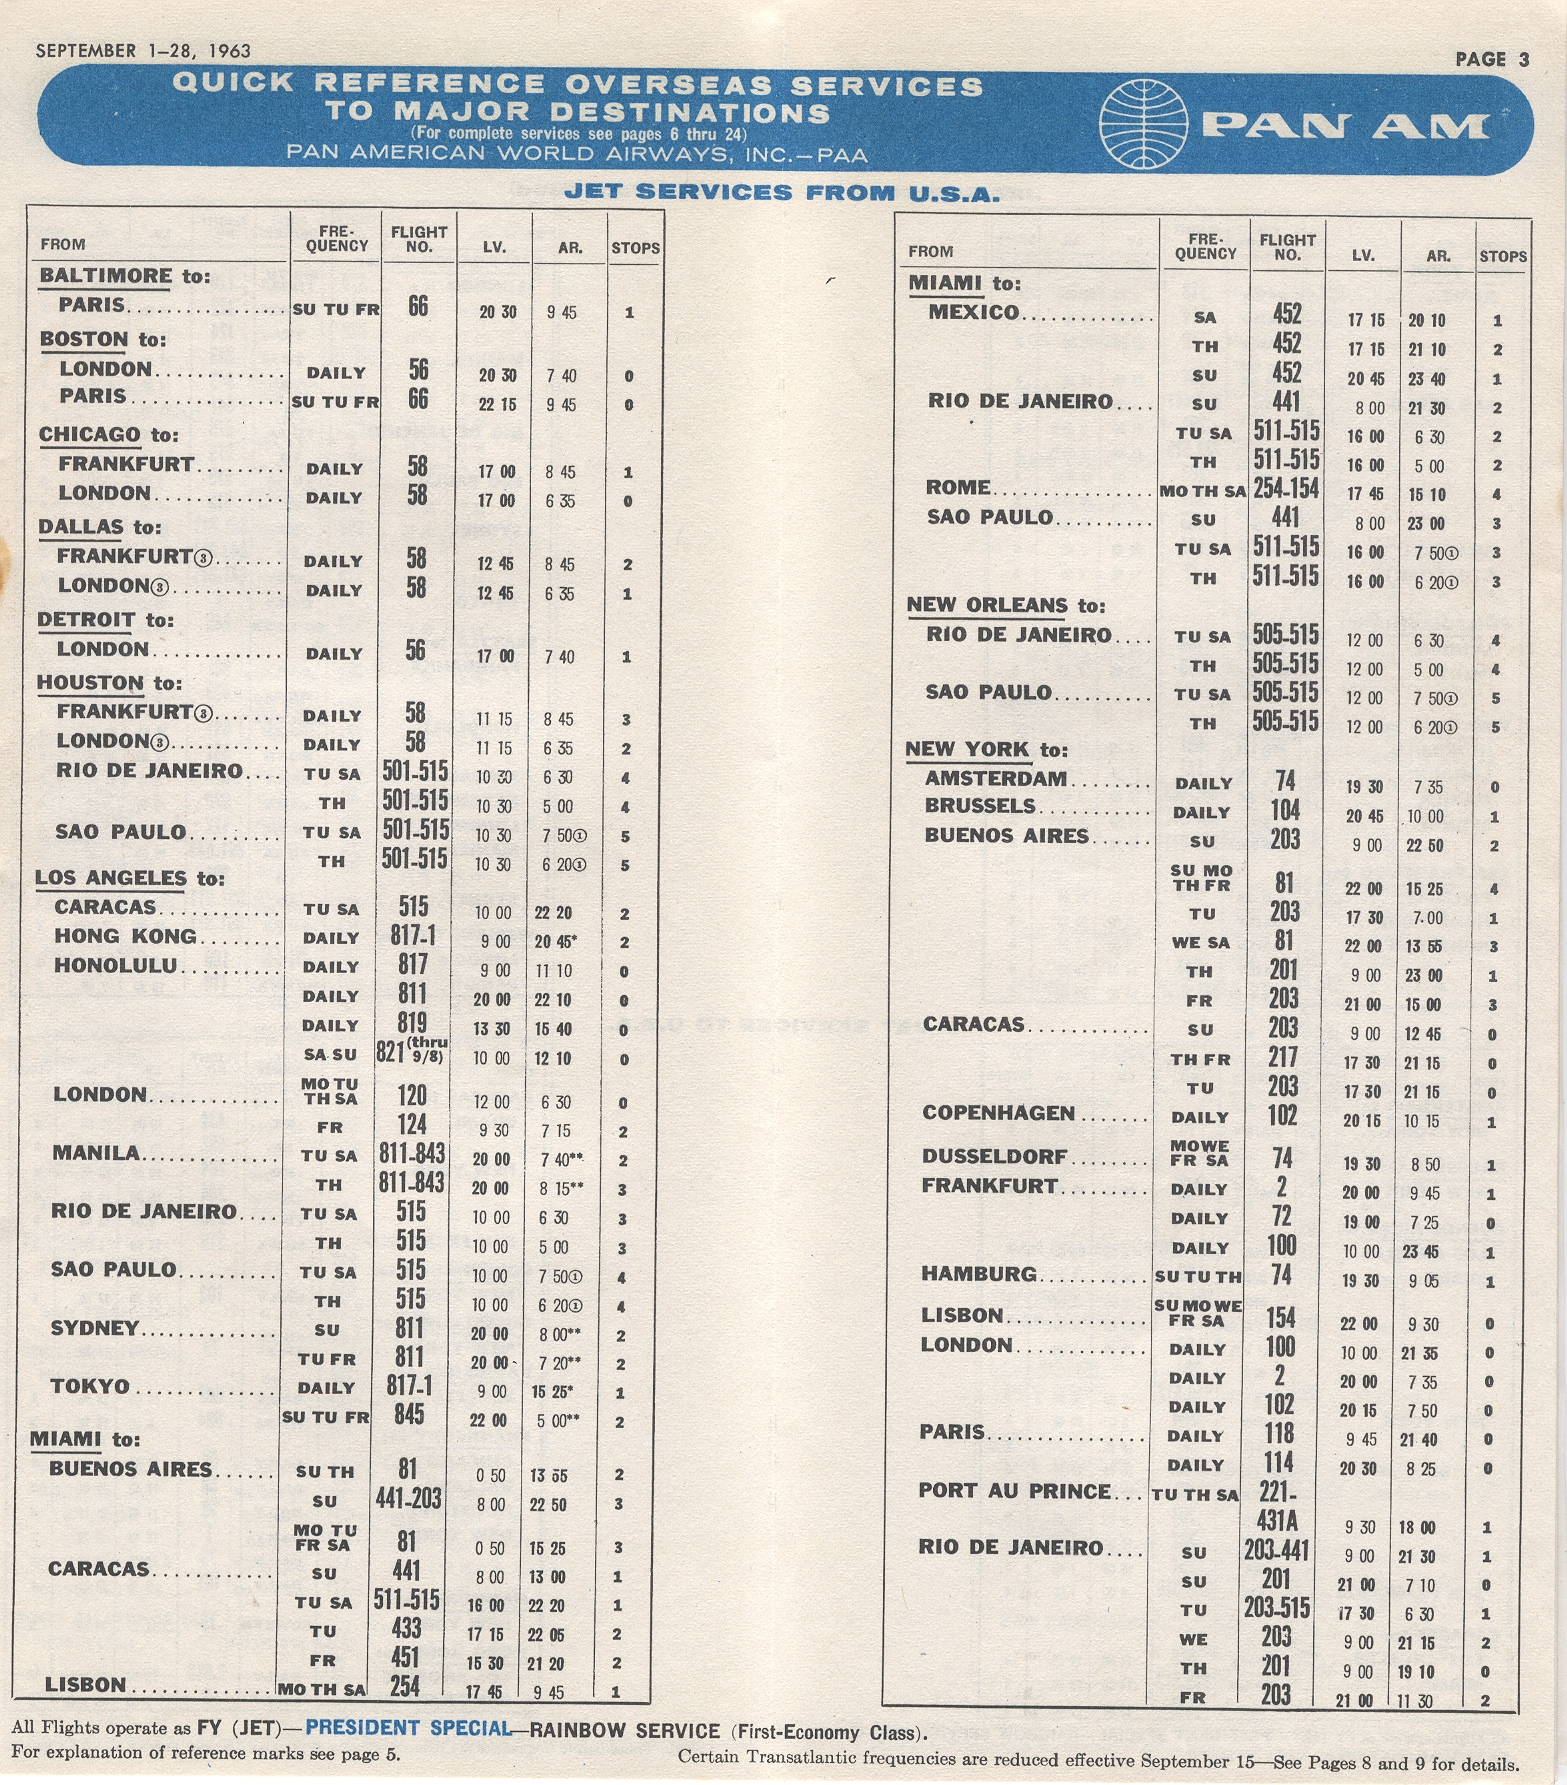 1963, September 1-30  Quick Reference Schedule page 1.